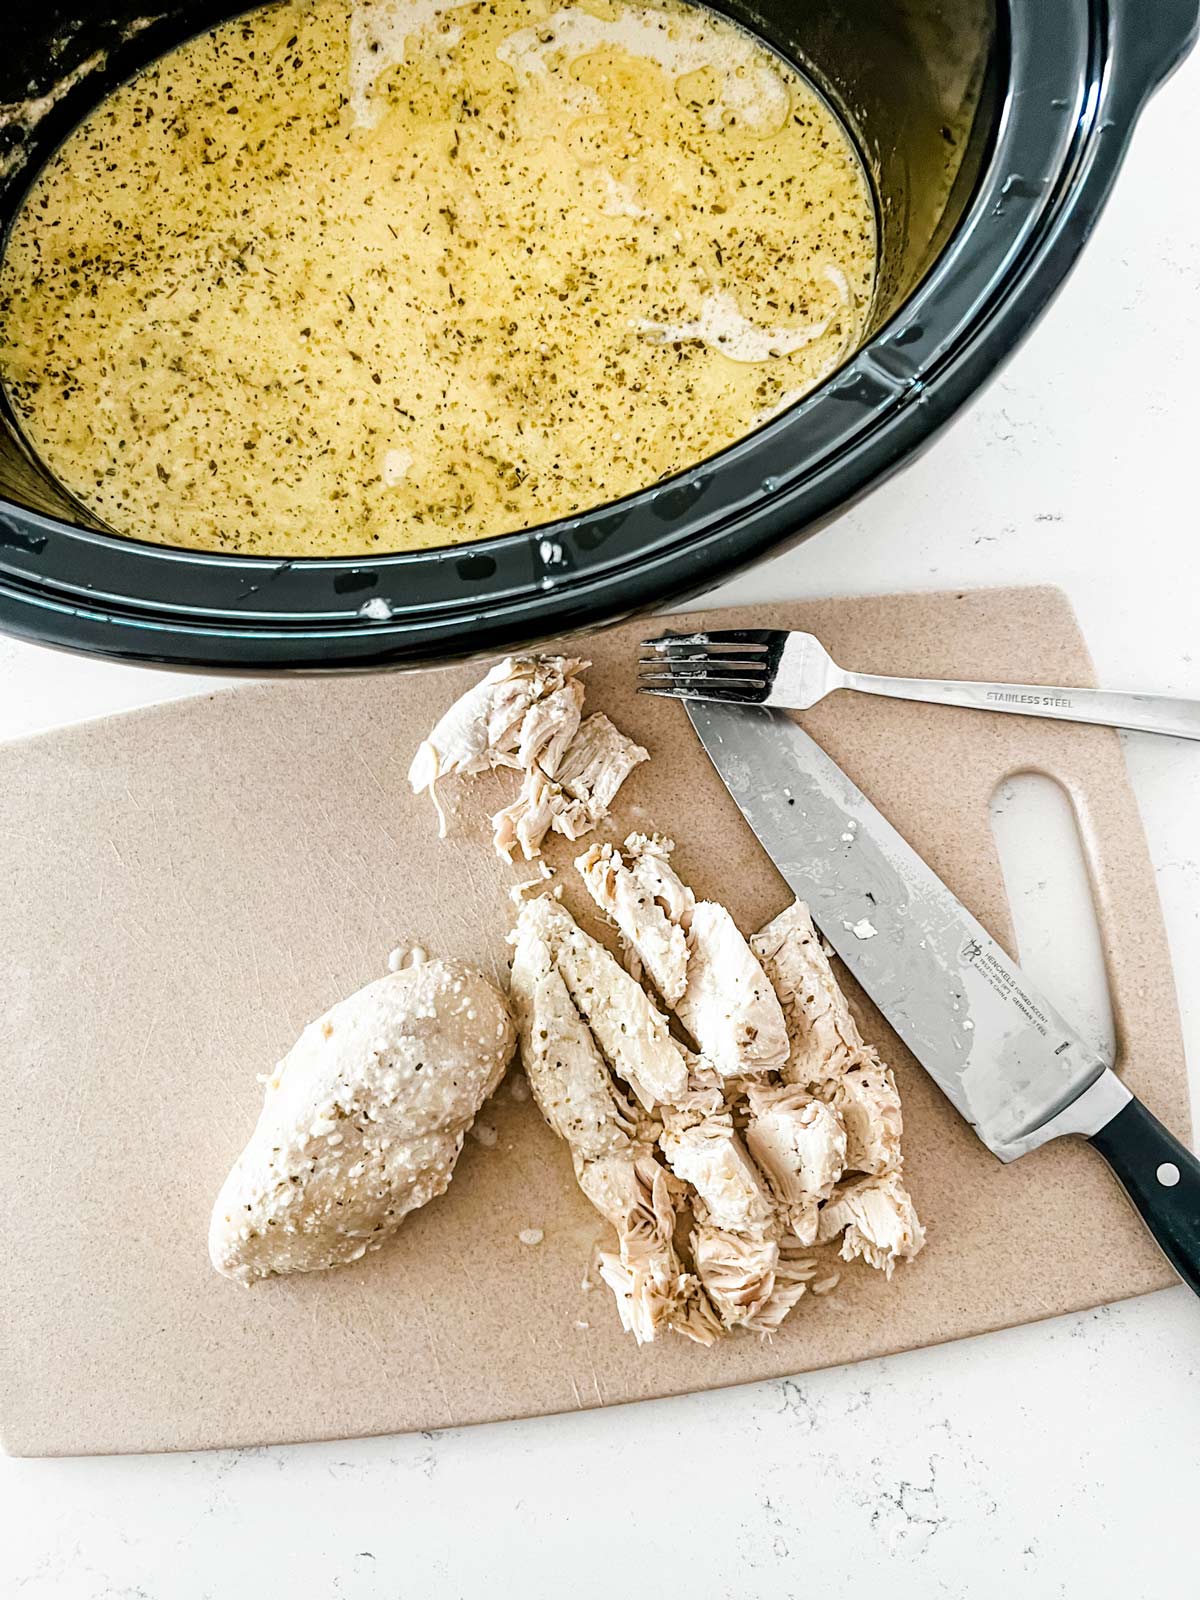 Chicken being cut o a cutting board next to a slow cooker with creamy sauce.